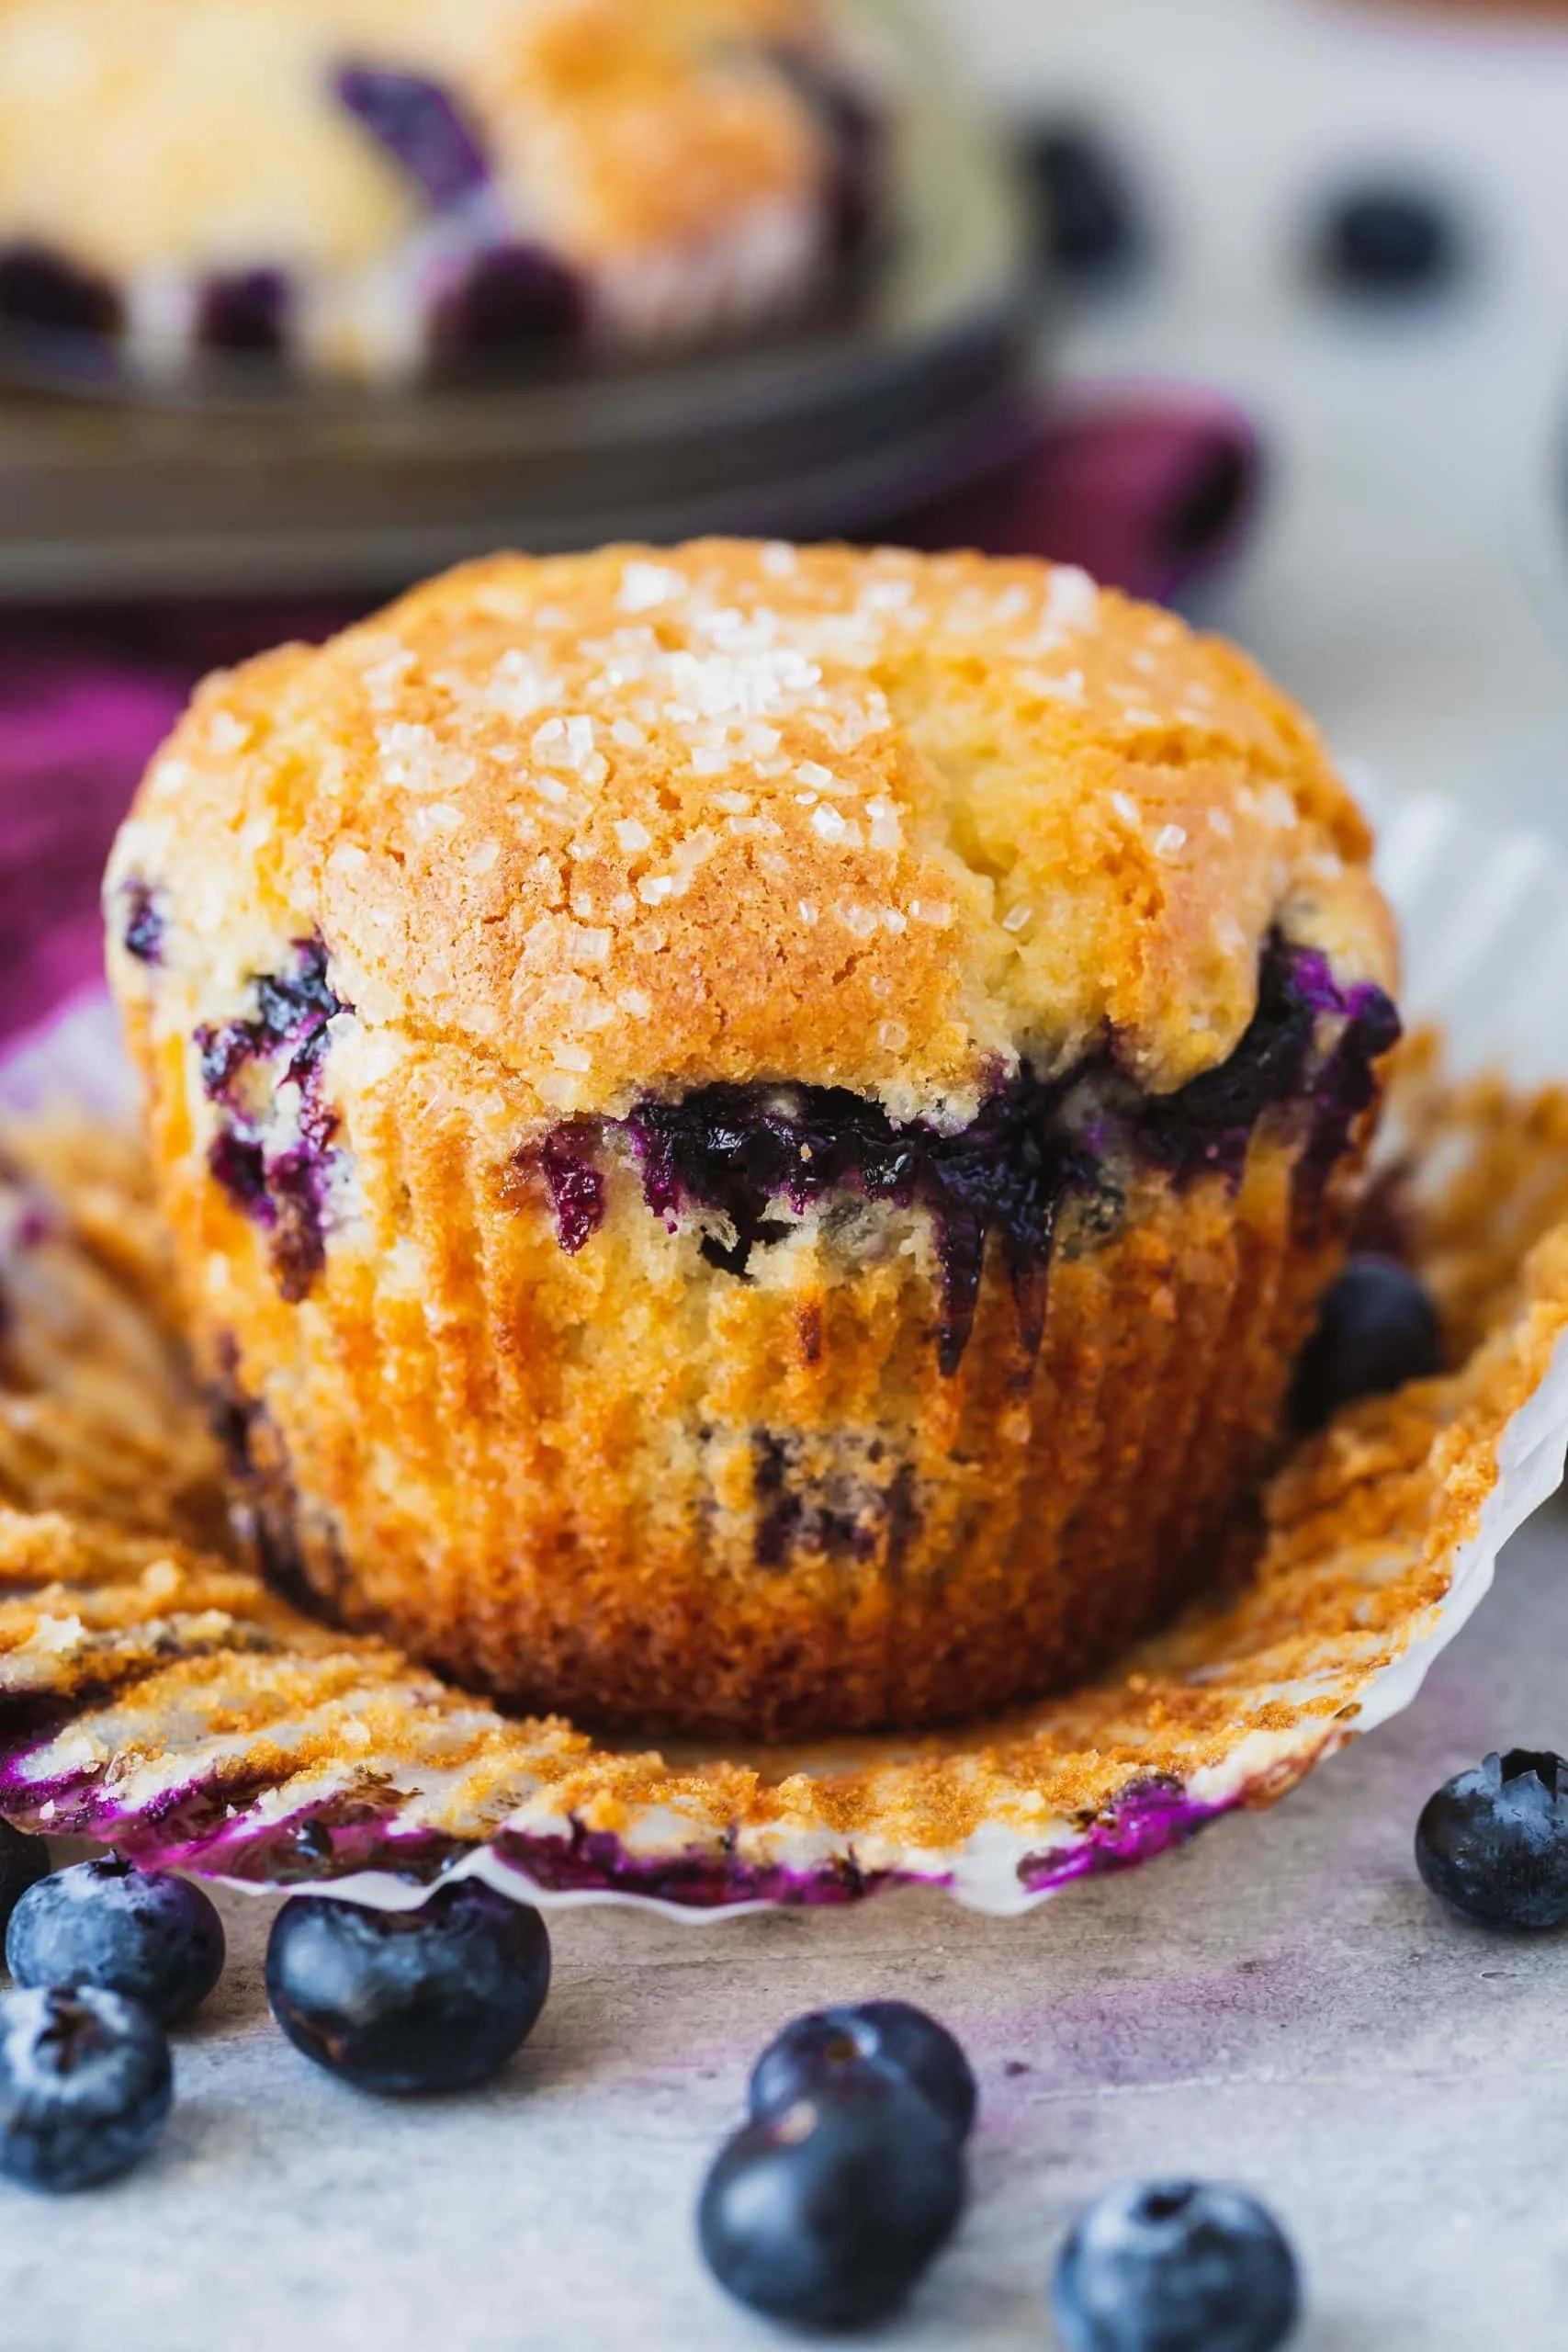 Bakery Style Blueberry Muffin Recipe - Oh Sweet Basil